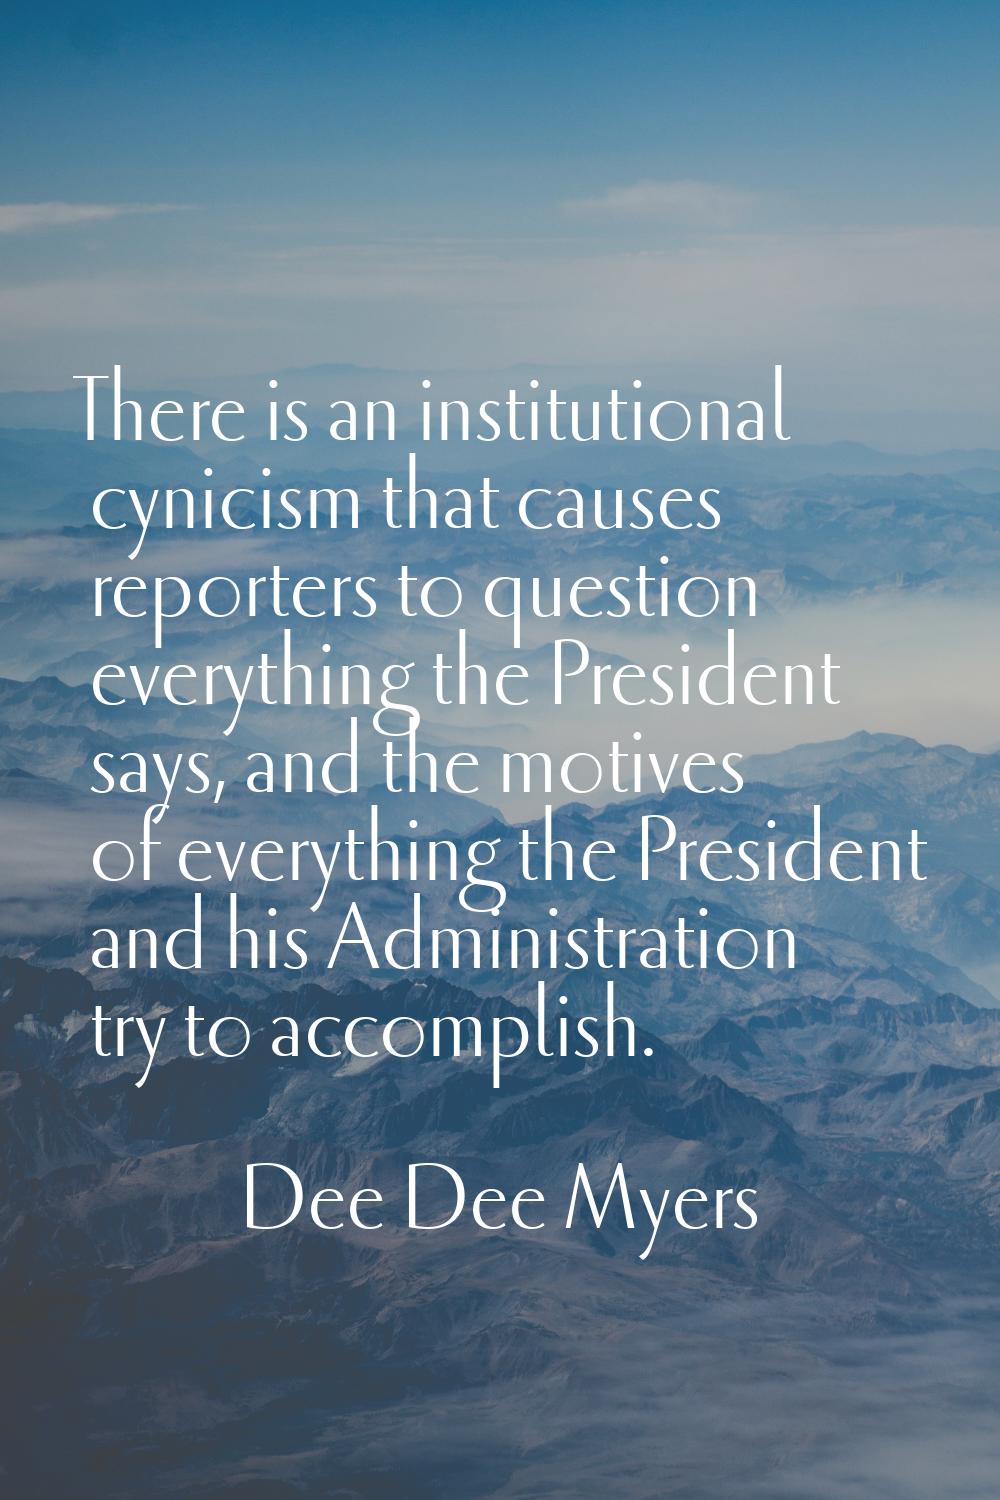 There is an institutional cynicism that causes reporters to question everything the President says,